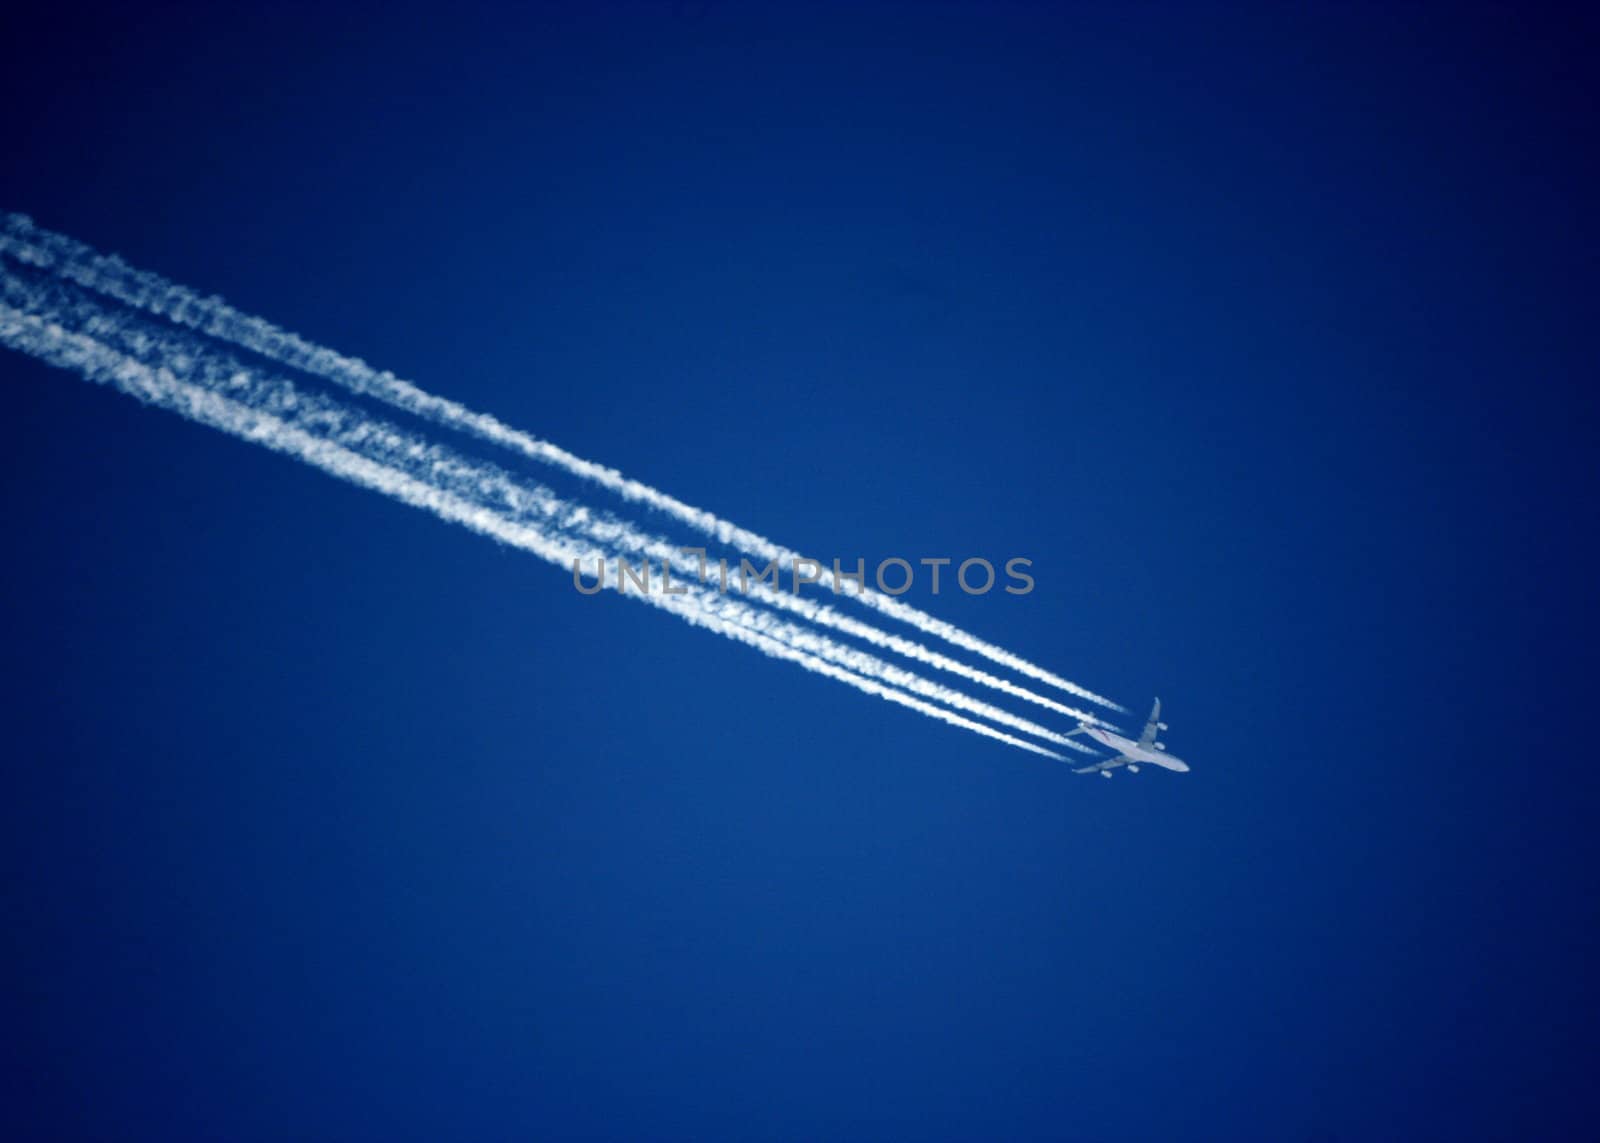 Trace of the plane on the blue sky background